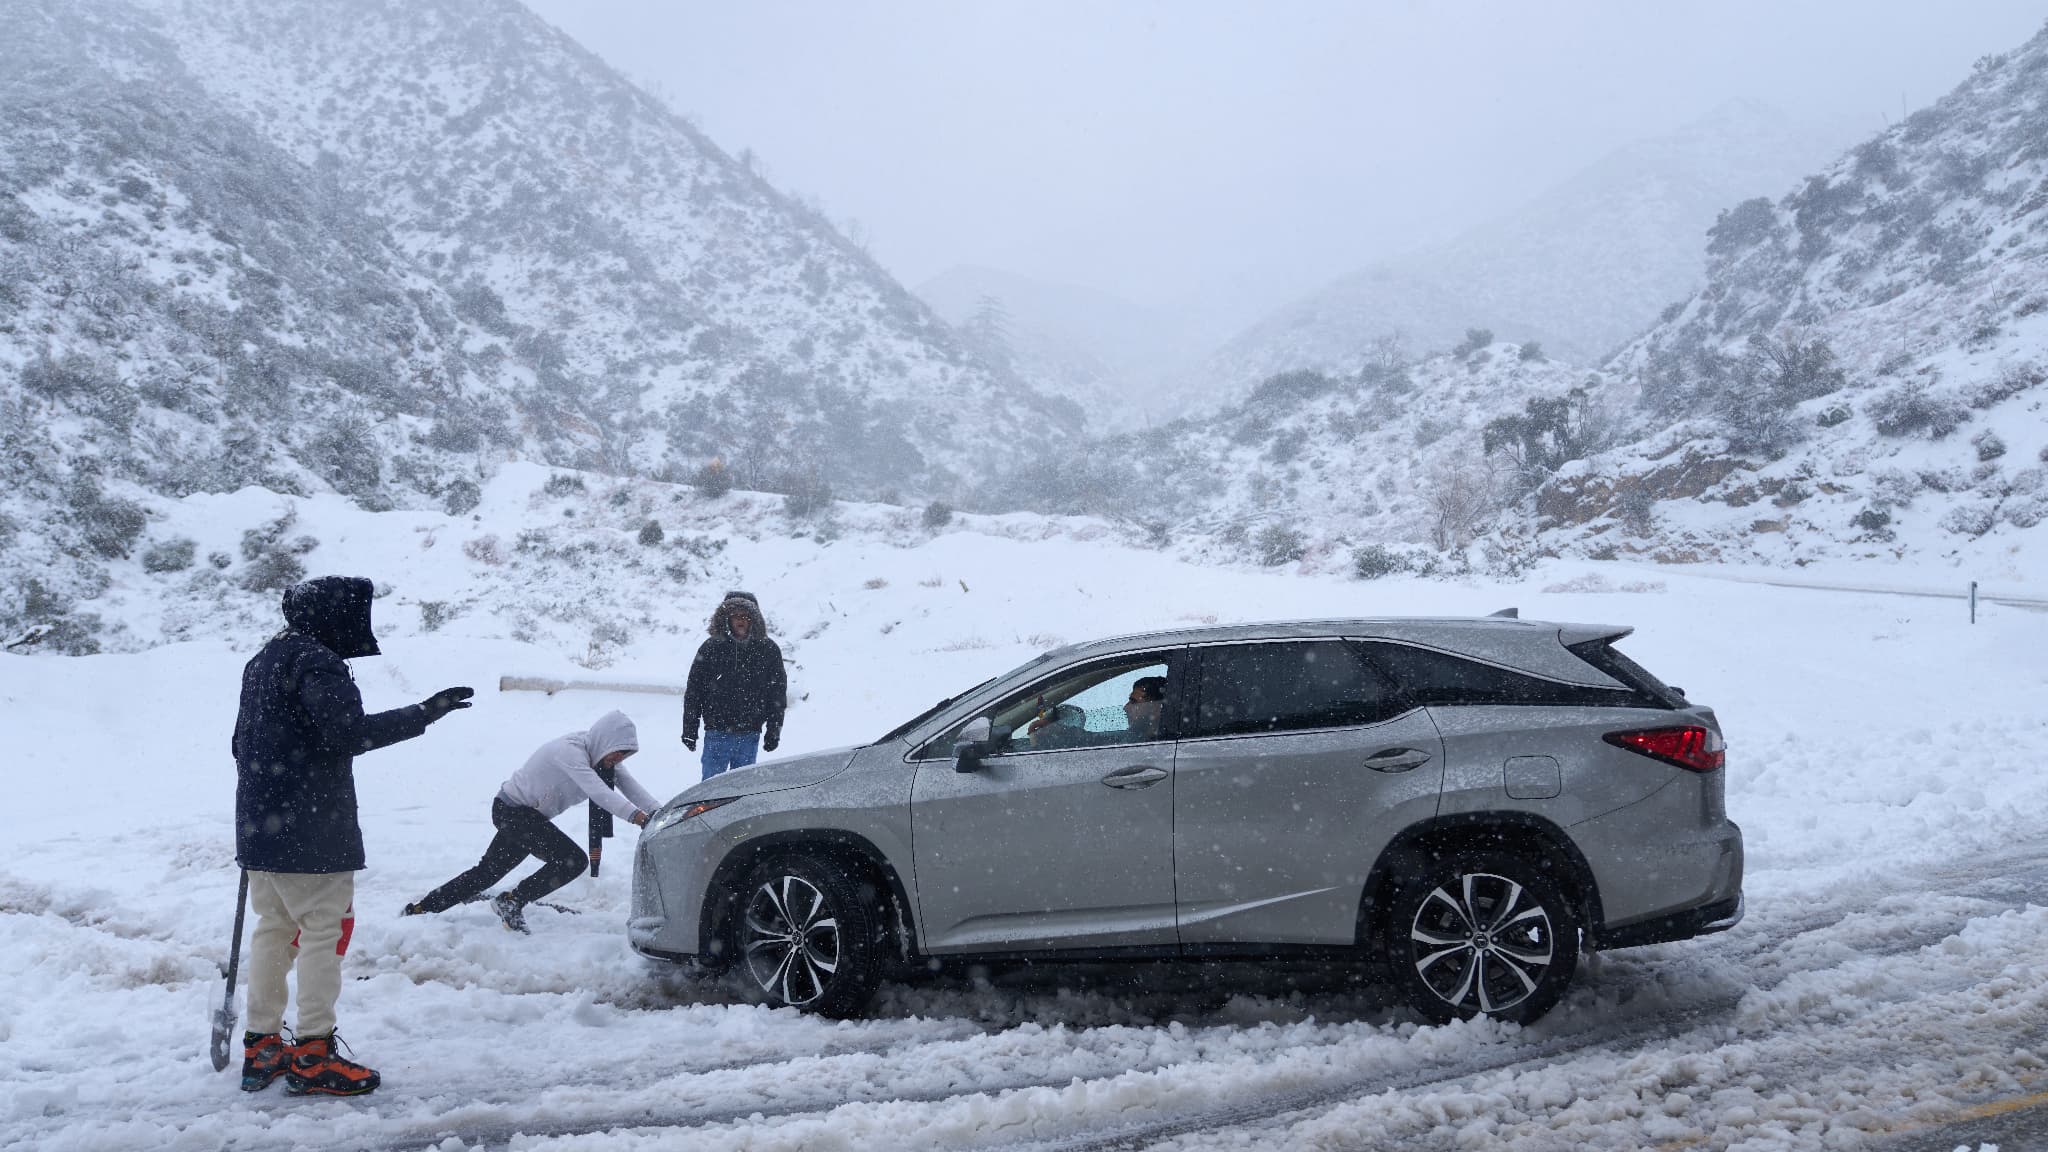 Great pictures of the blizzard that hit California